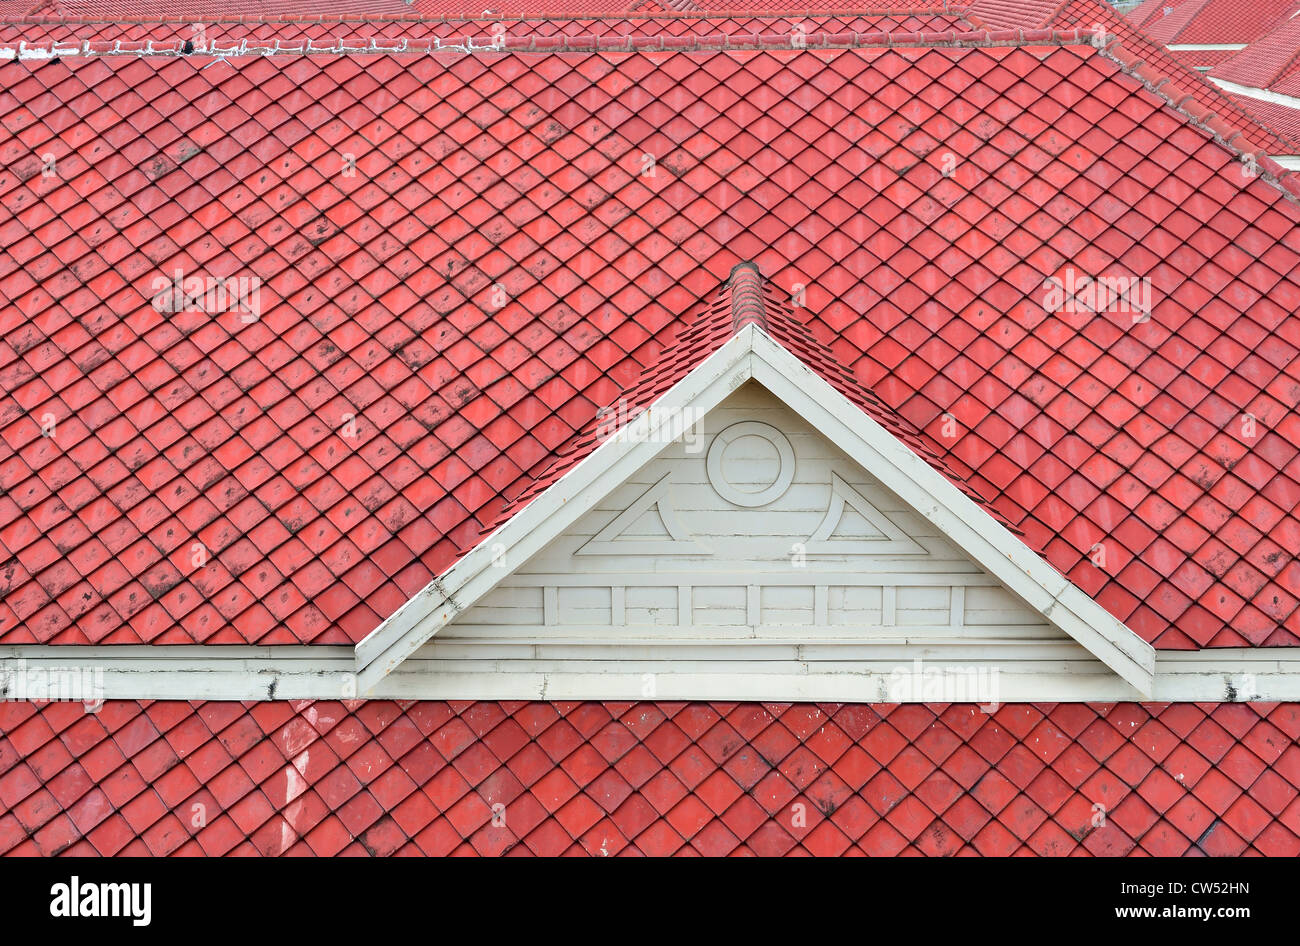 The white gable and red baked clay roof. Stock Photo